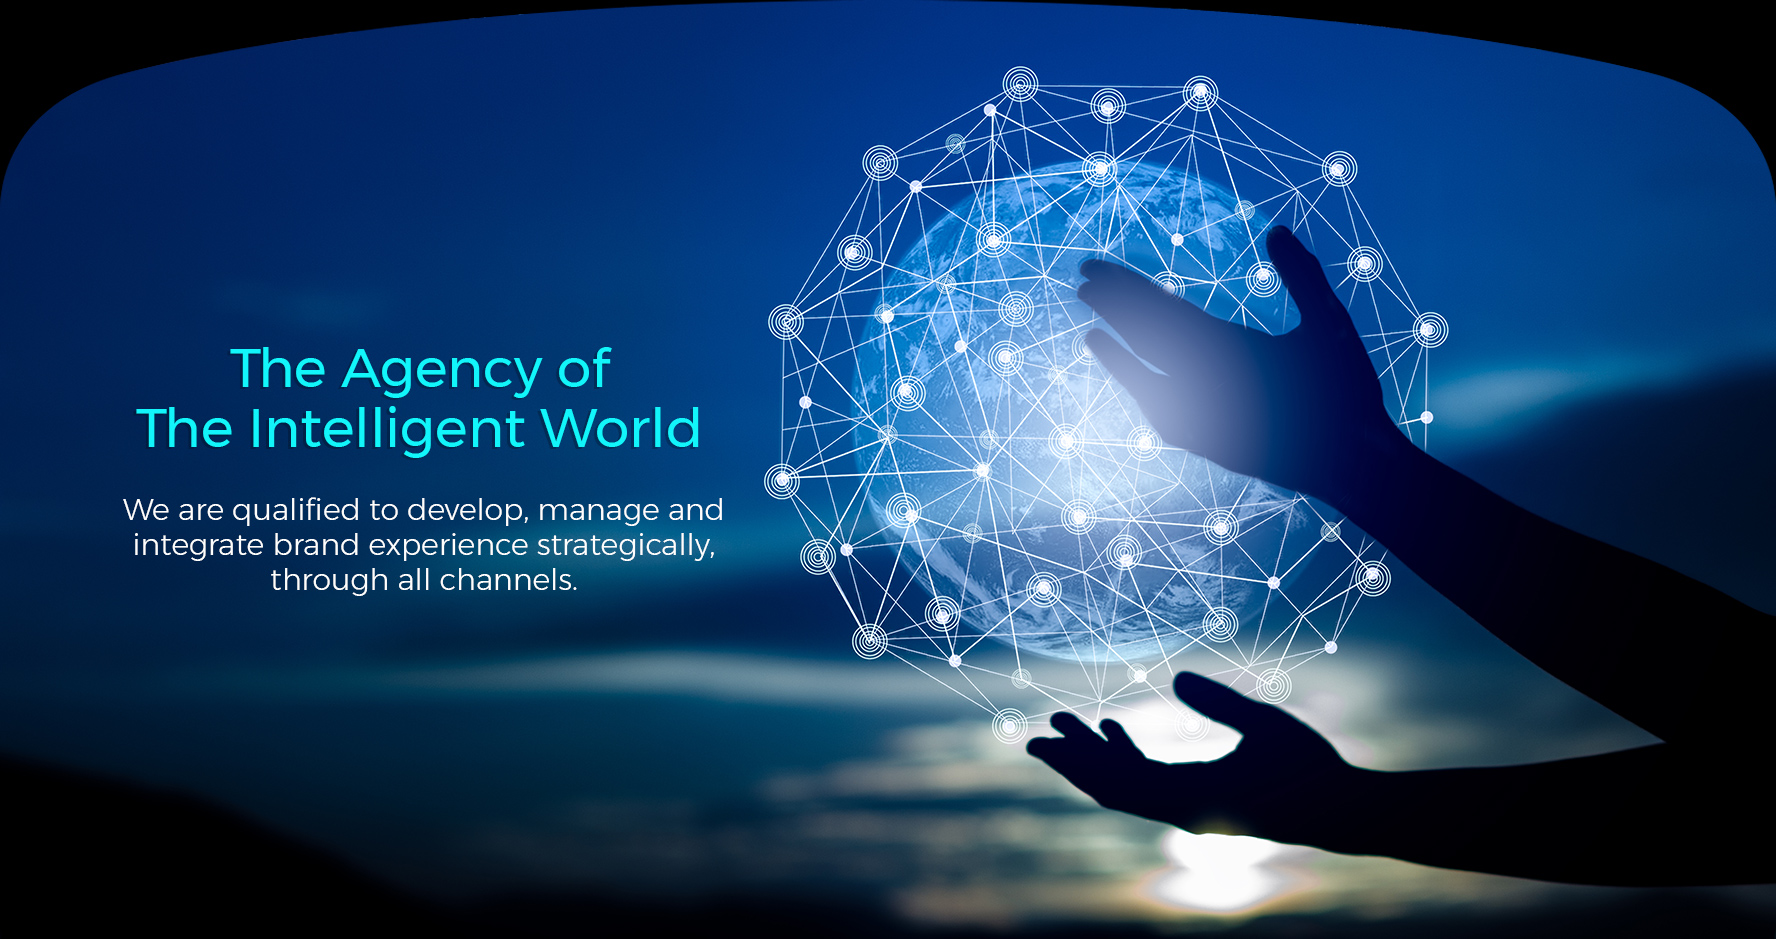 The agency of the new world, we are qualified to develop, manage and integrate brand experience strategically, through all channels